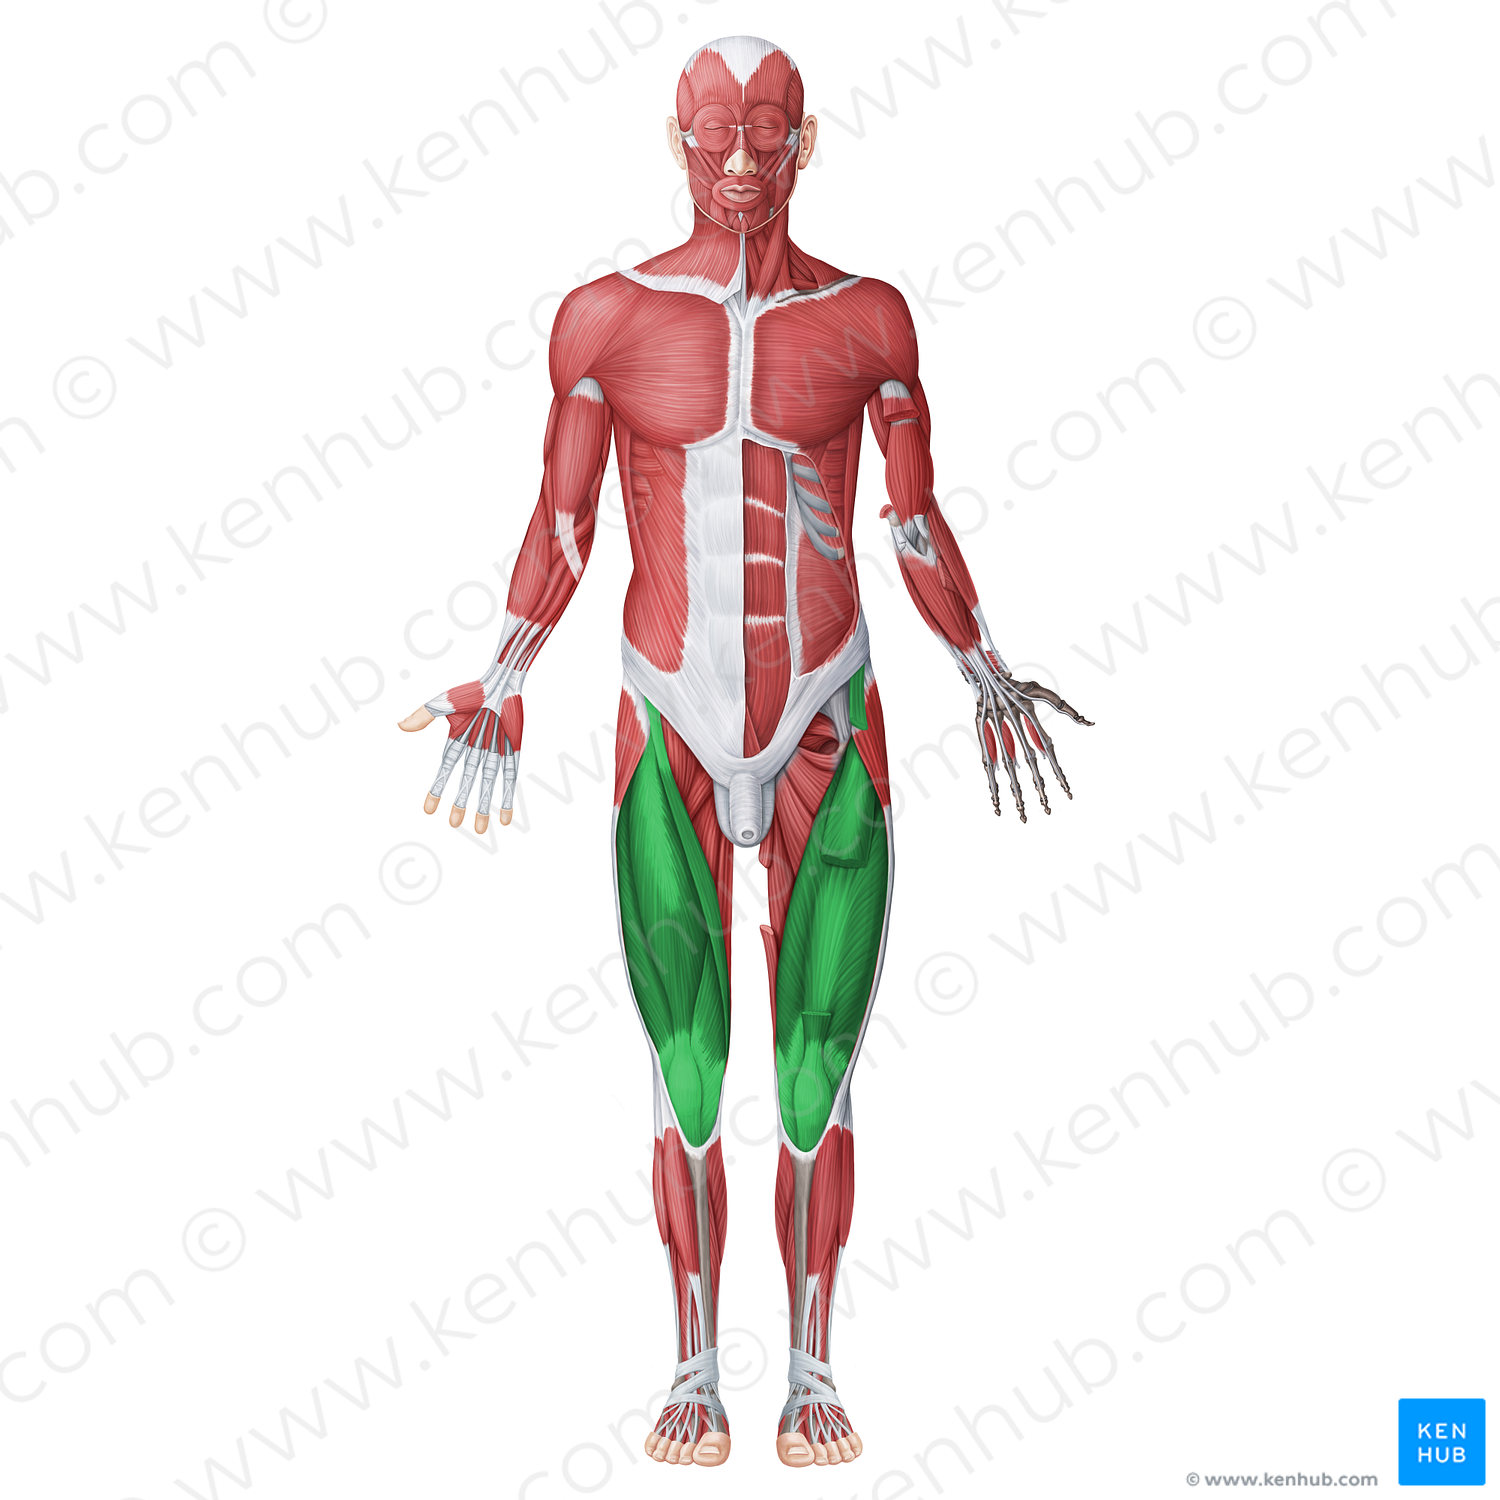 Anterior muscles of thigh (#20058)